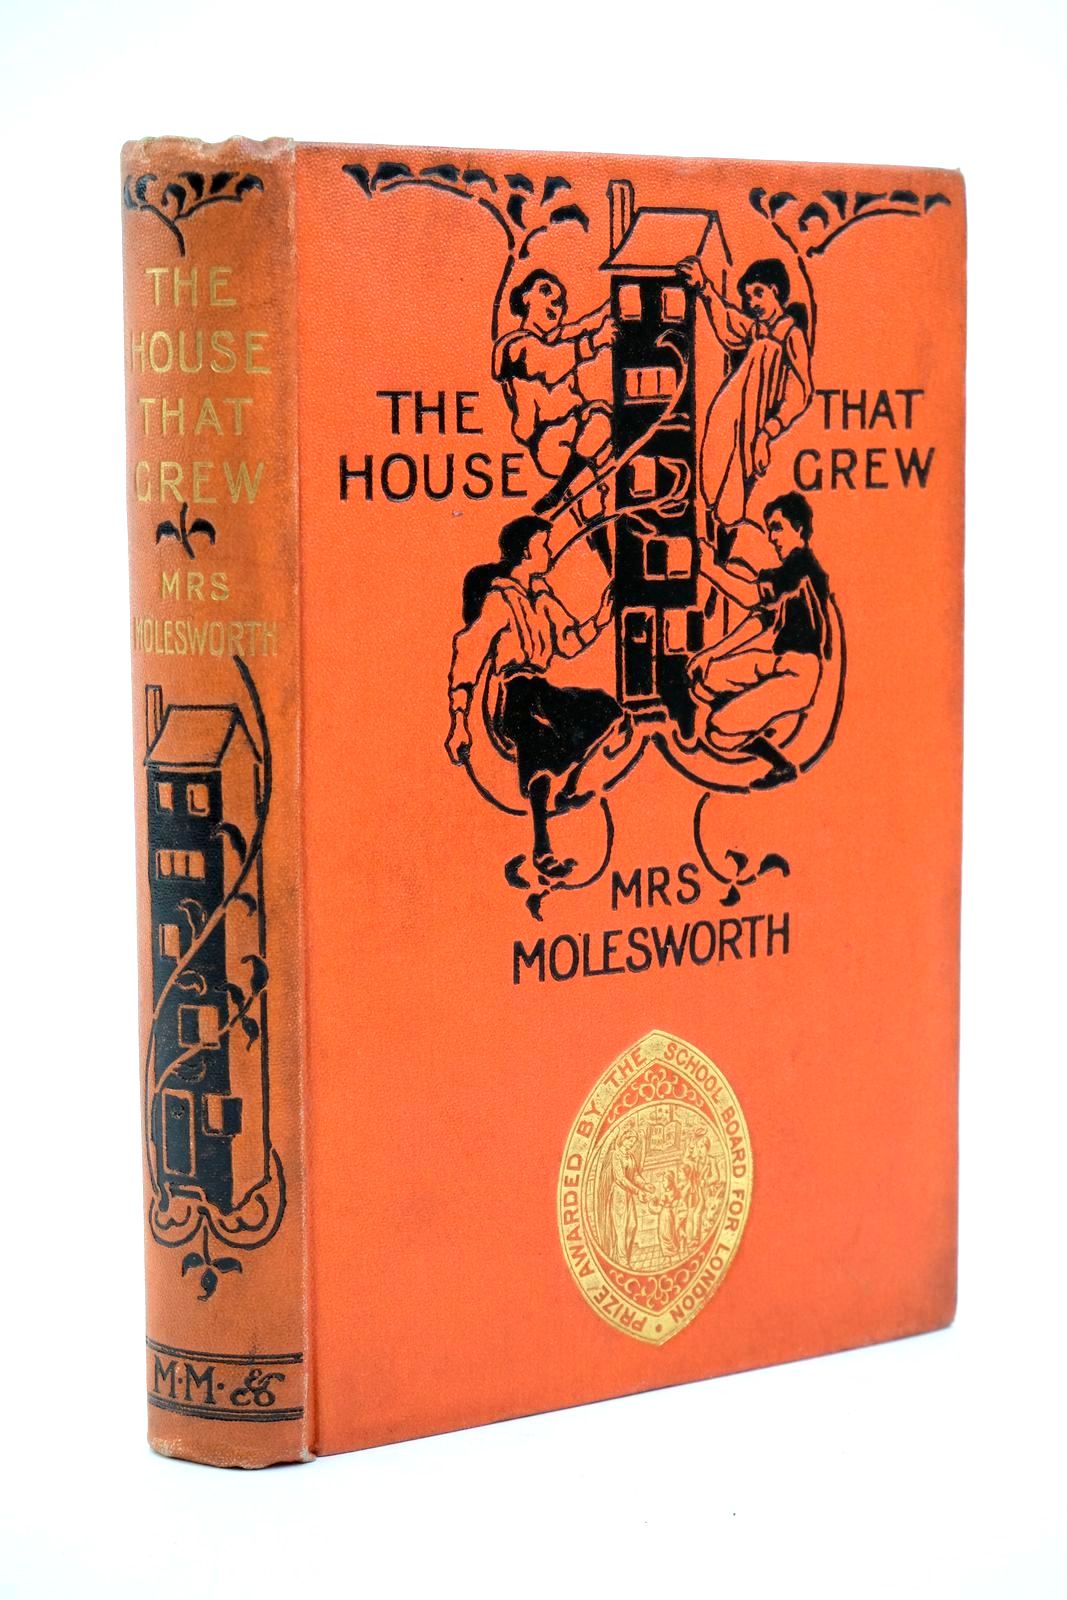 Photo of THE HOUSE THAT GREW written by Molesworth, Mrs. illustrated by Woodward, Alice B. published by Macmillan &amp; Co. Ltd. (STOCK CODE: 1322992)  for sale by Stella & Rose's Books